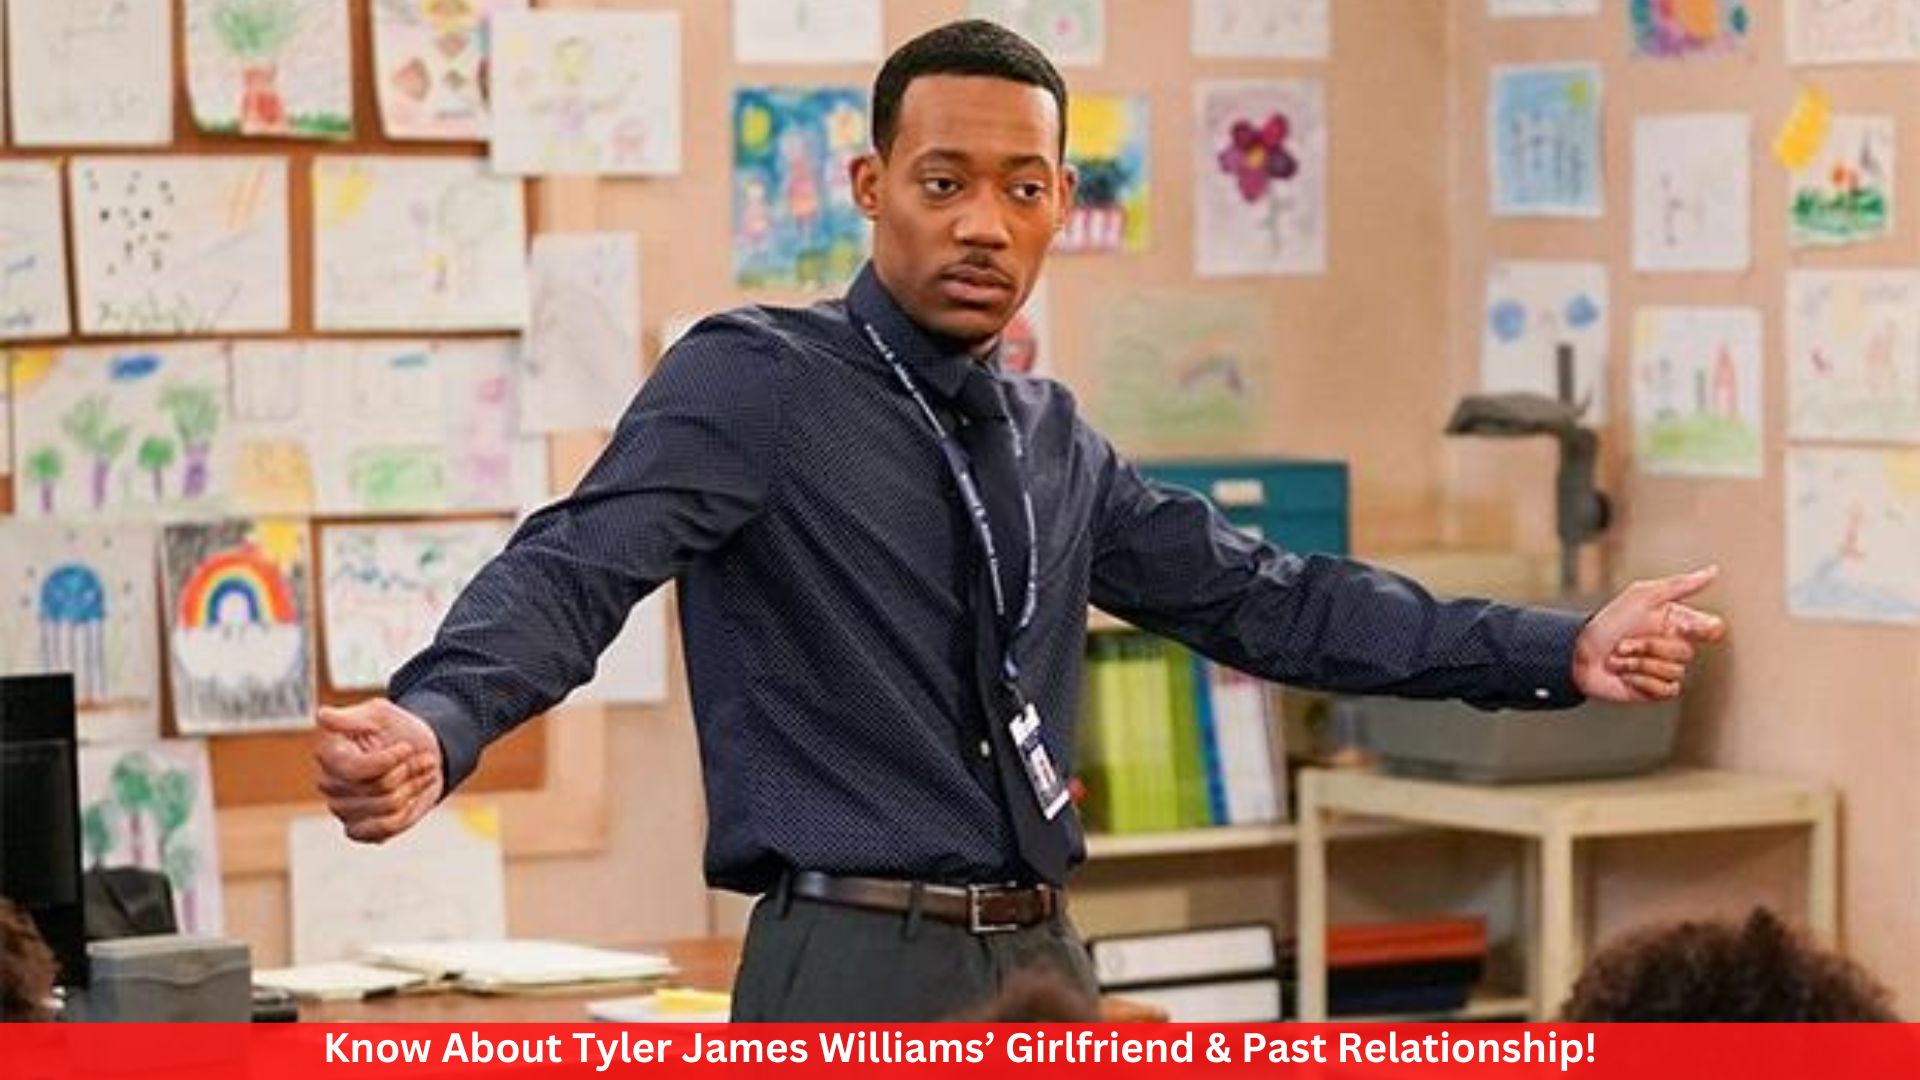 Know About Tyler James Williams’ Girlfriend & Past Relationship!